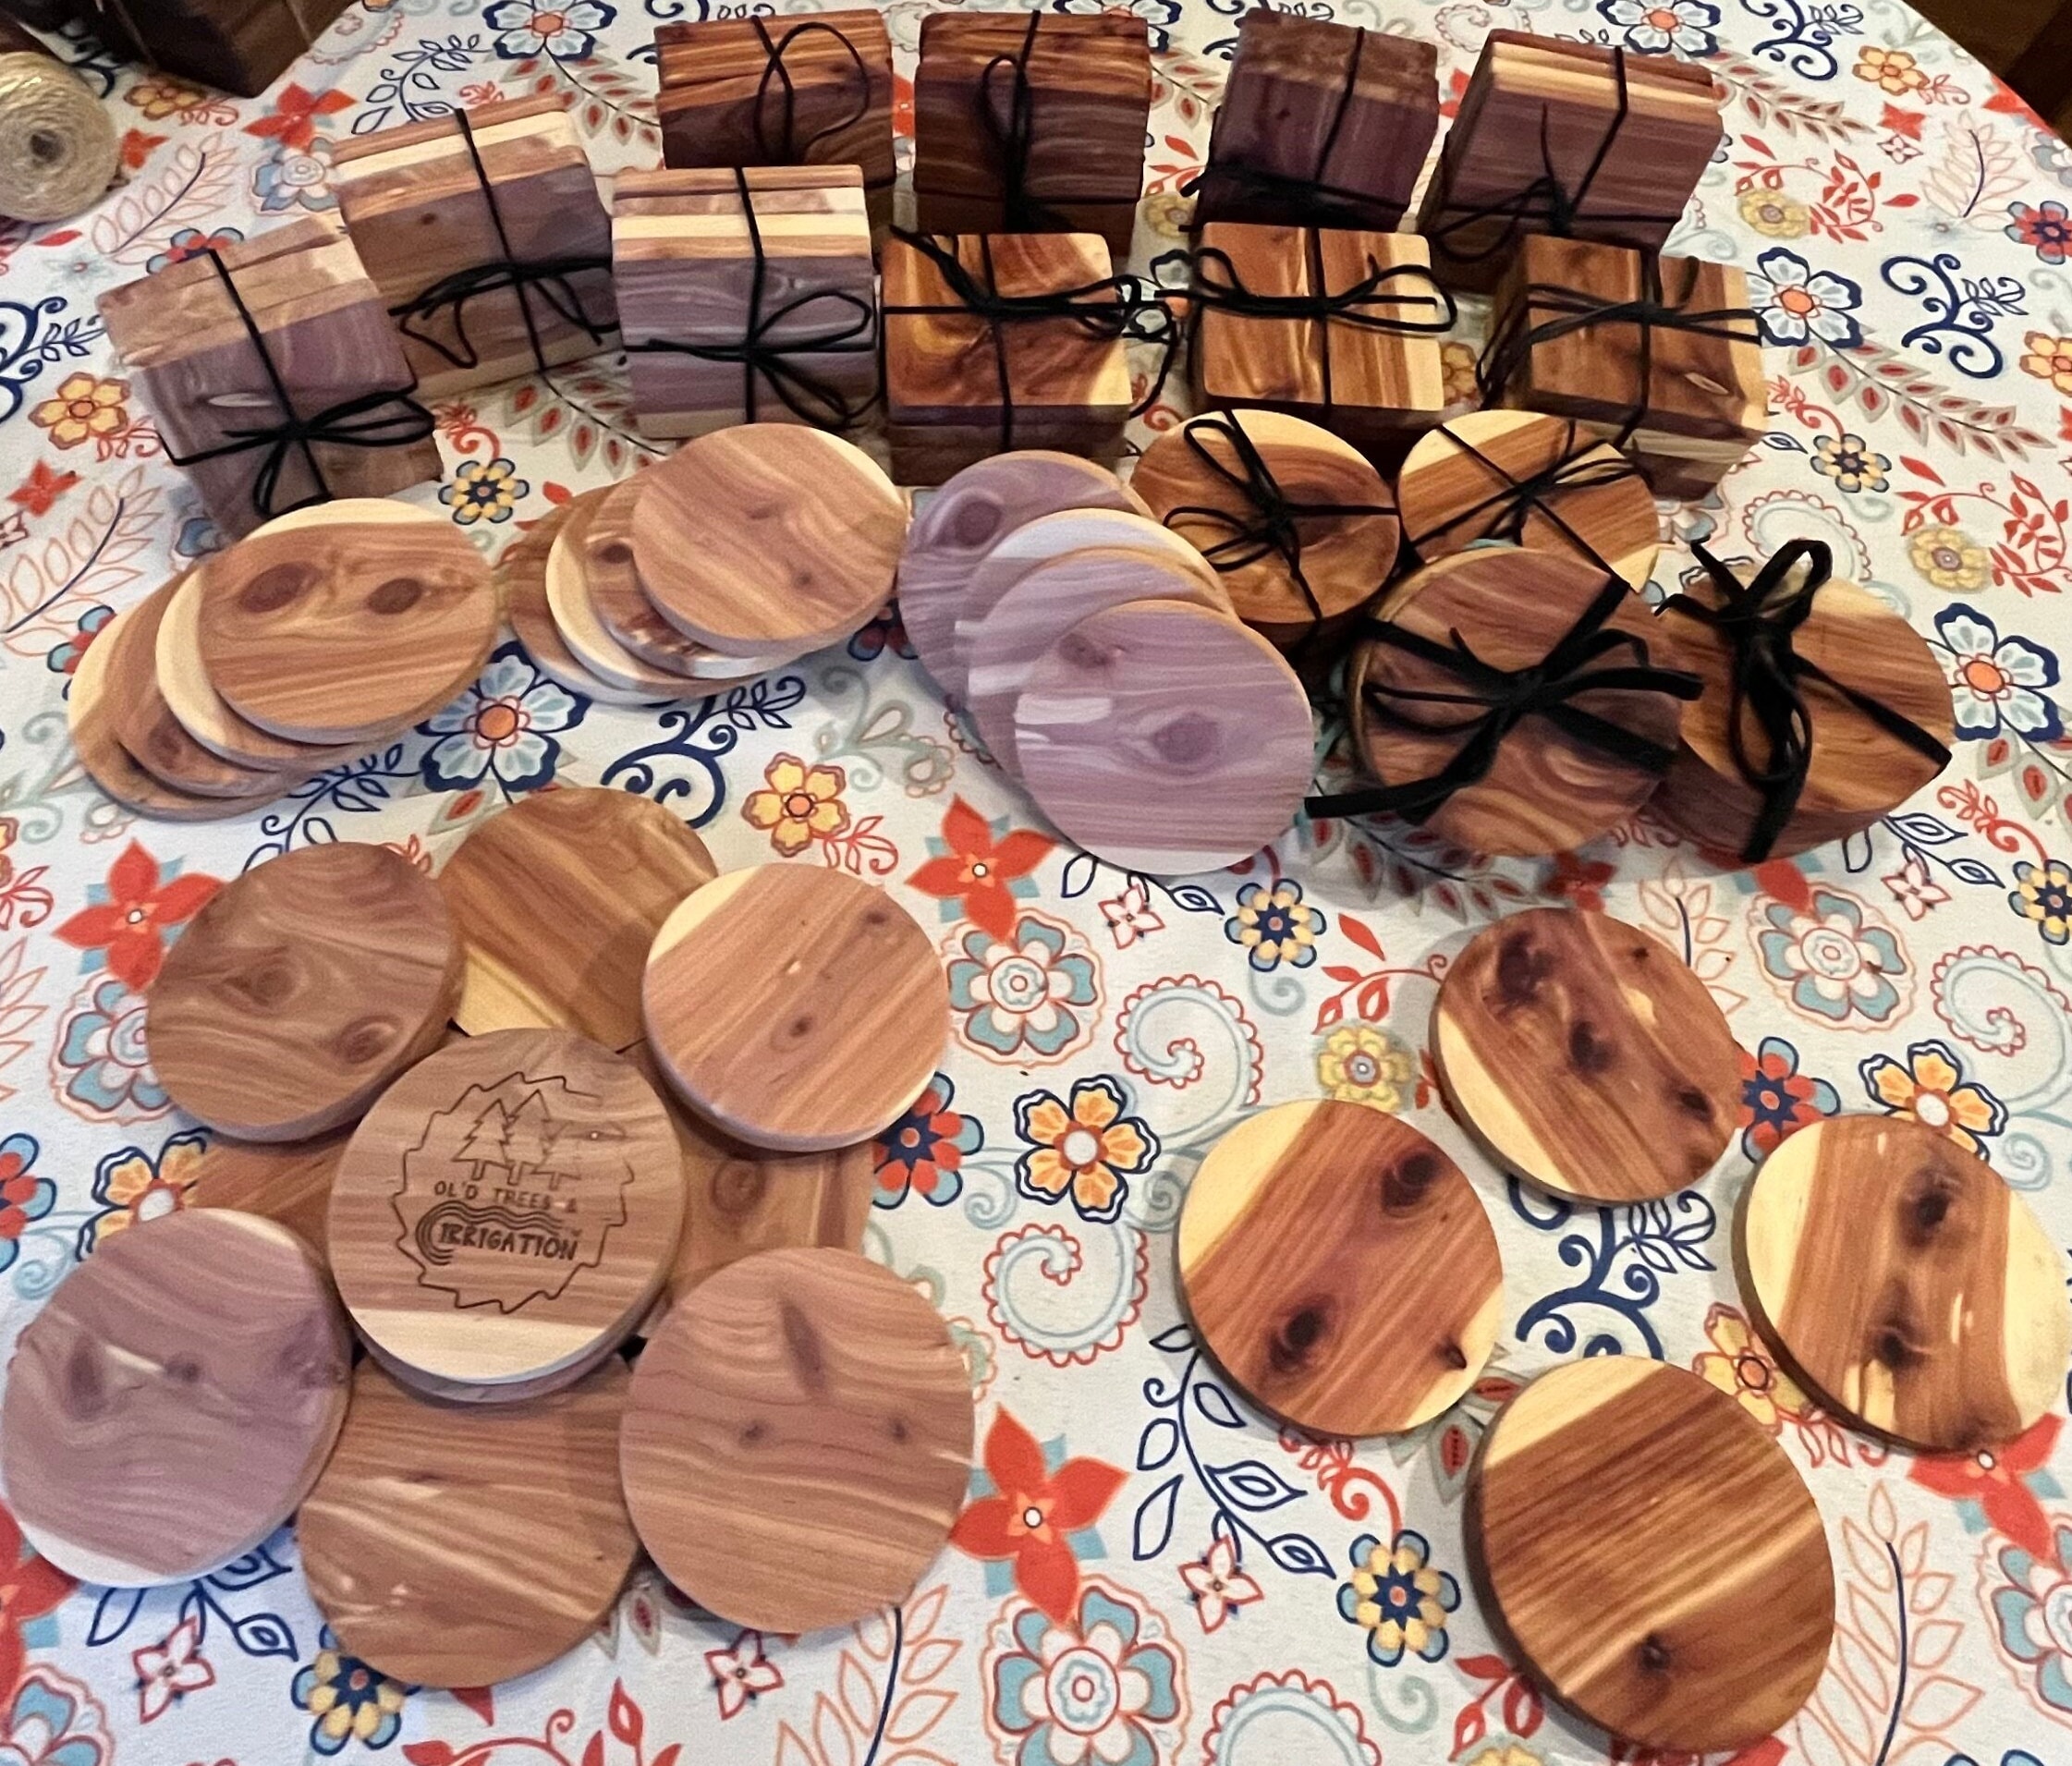 Wooden Drink Coasters,4 Cup Coasters for Drinks Absorbent Cork Coasters Set,Large Natural Wood Stackable Reusable Coasters for Home Office Coffee Bar